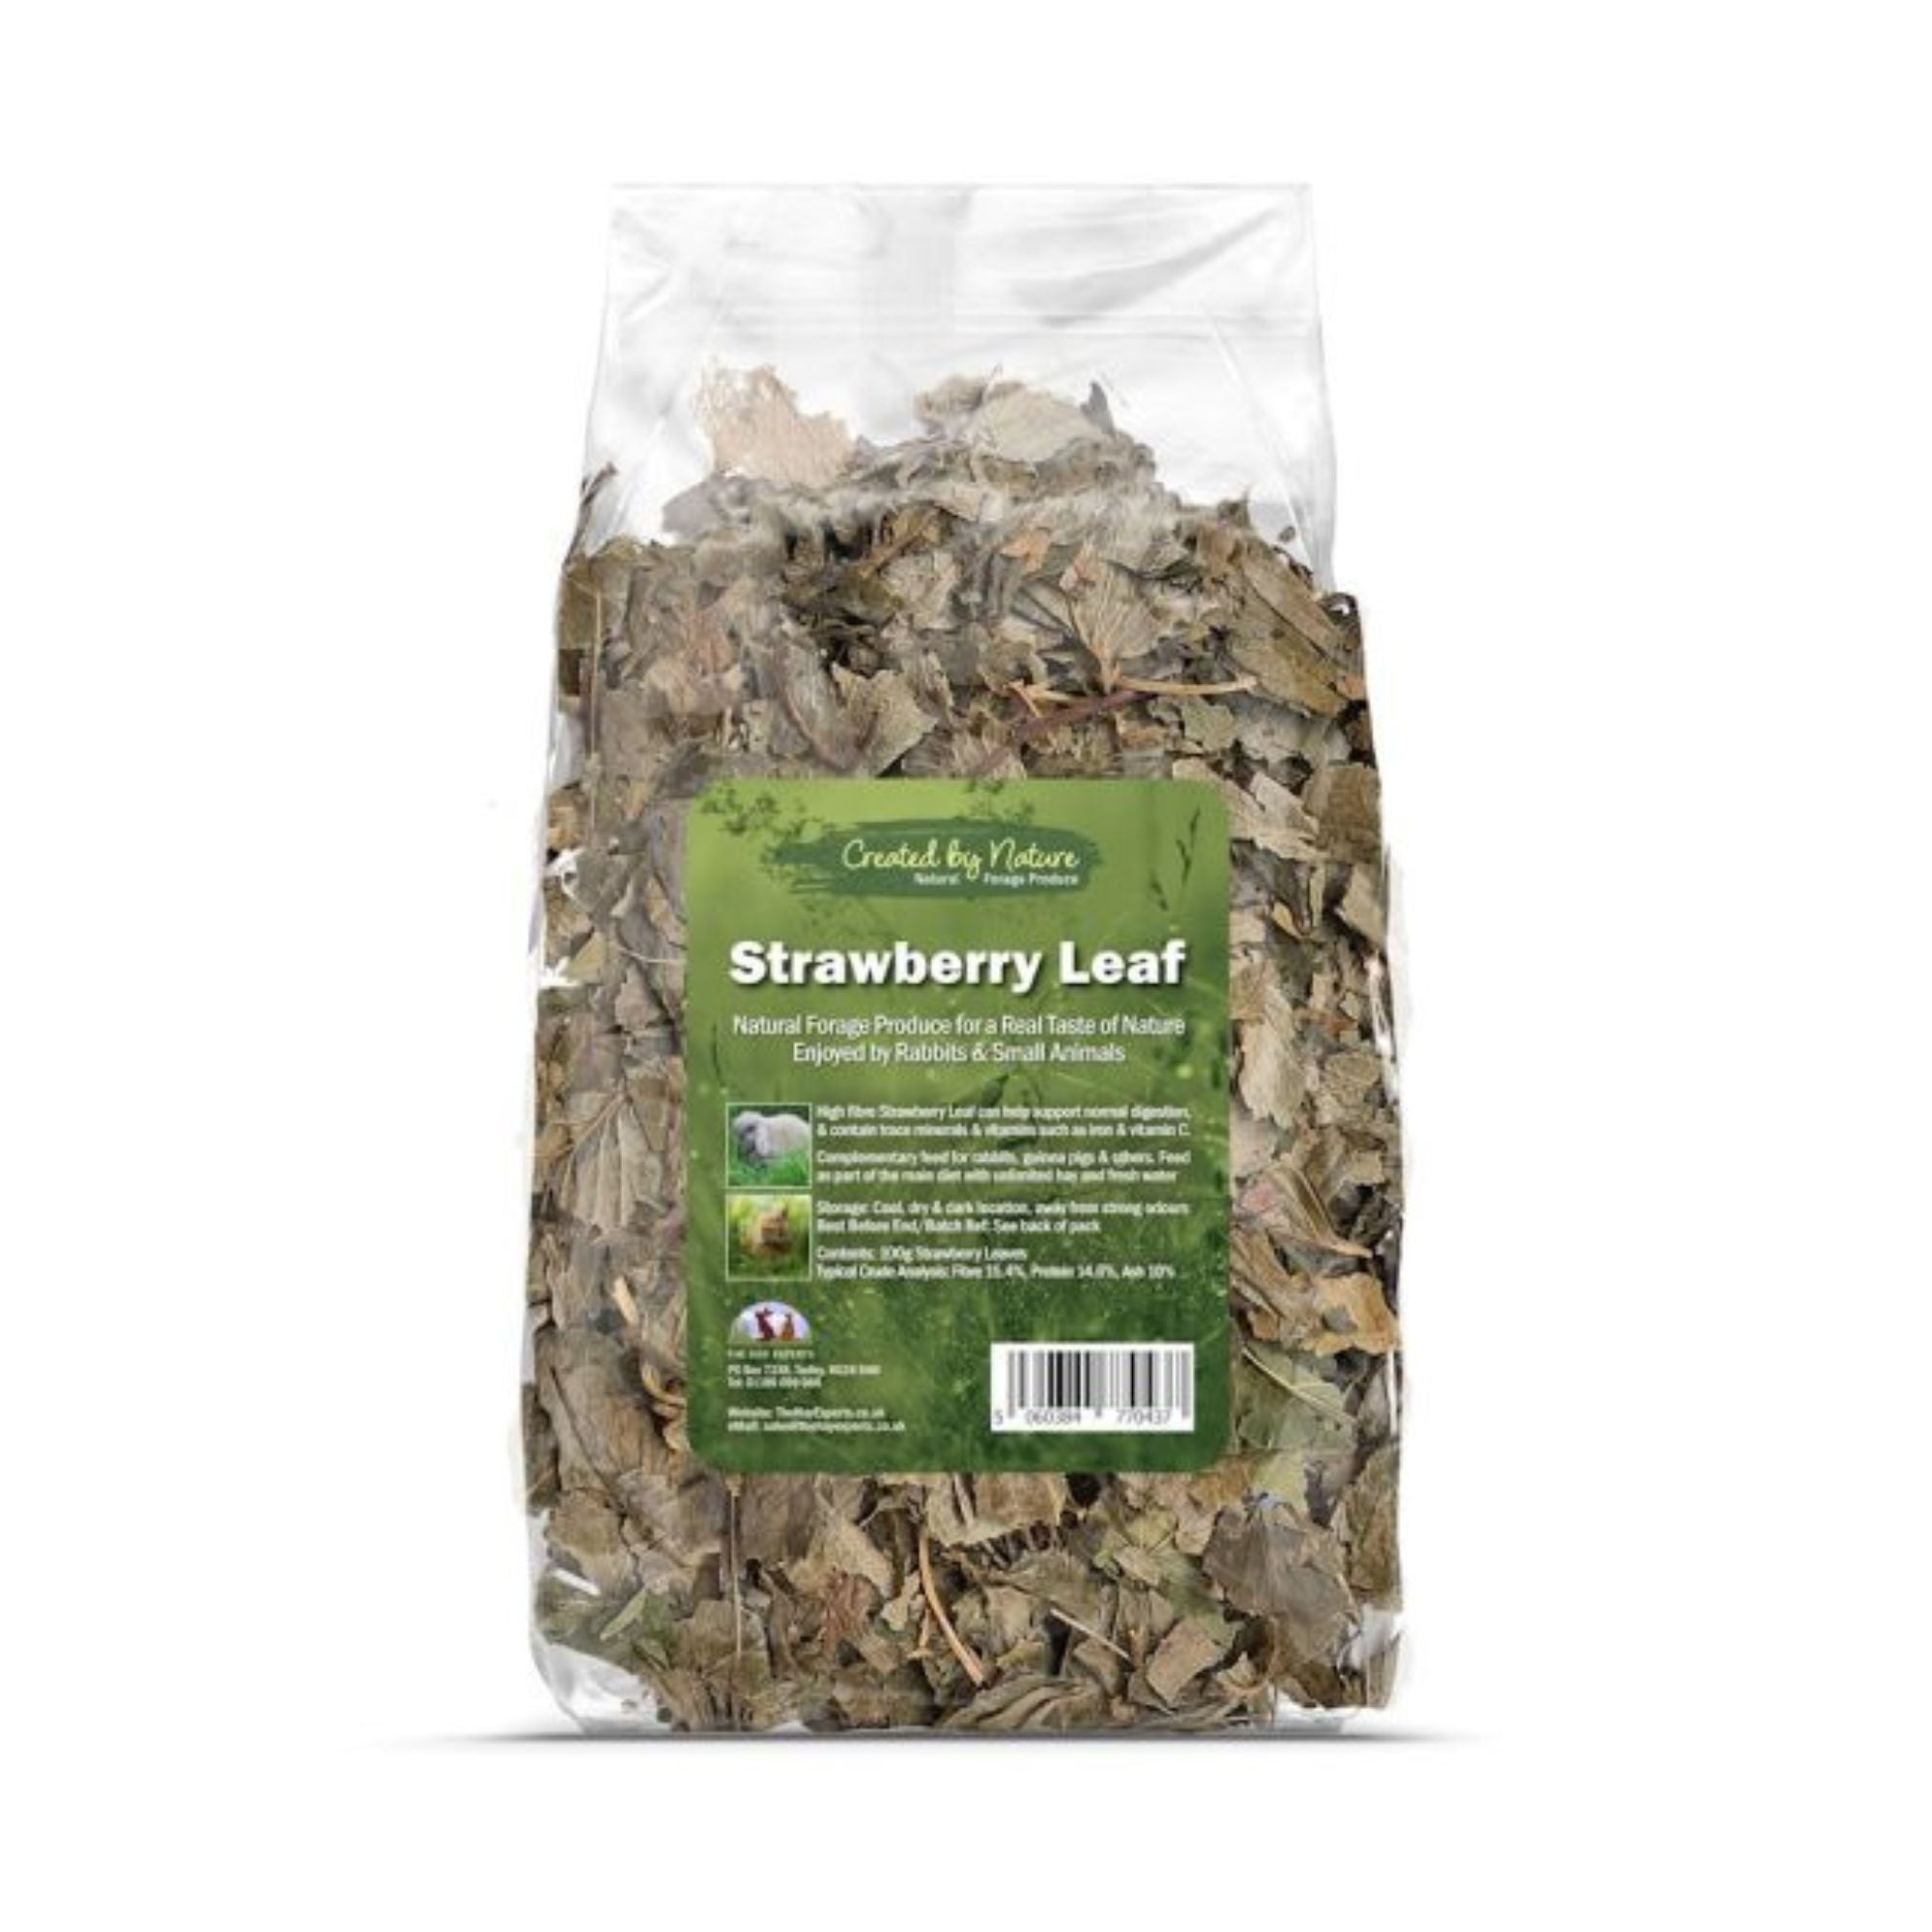 The Hay Experts Strawberry Leaf, Dried Herbs for Rabbits | Barks & Bunnies